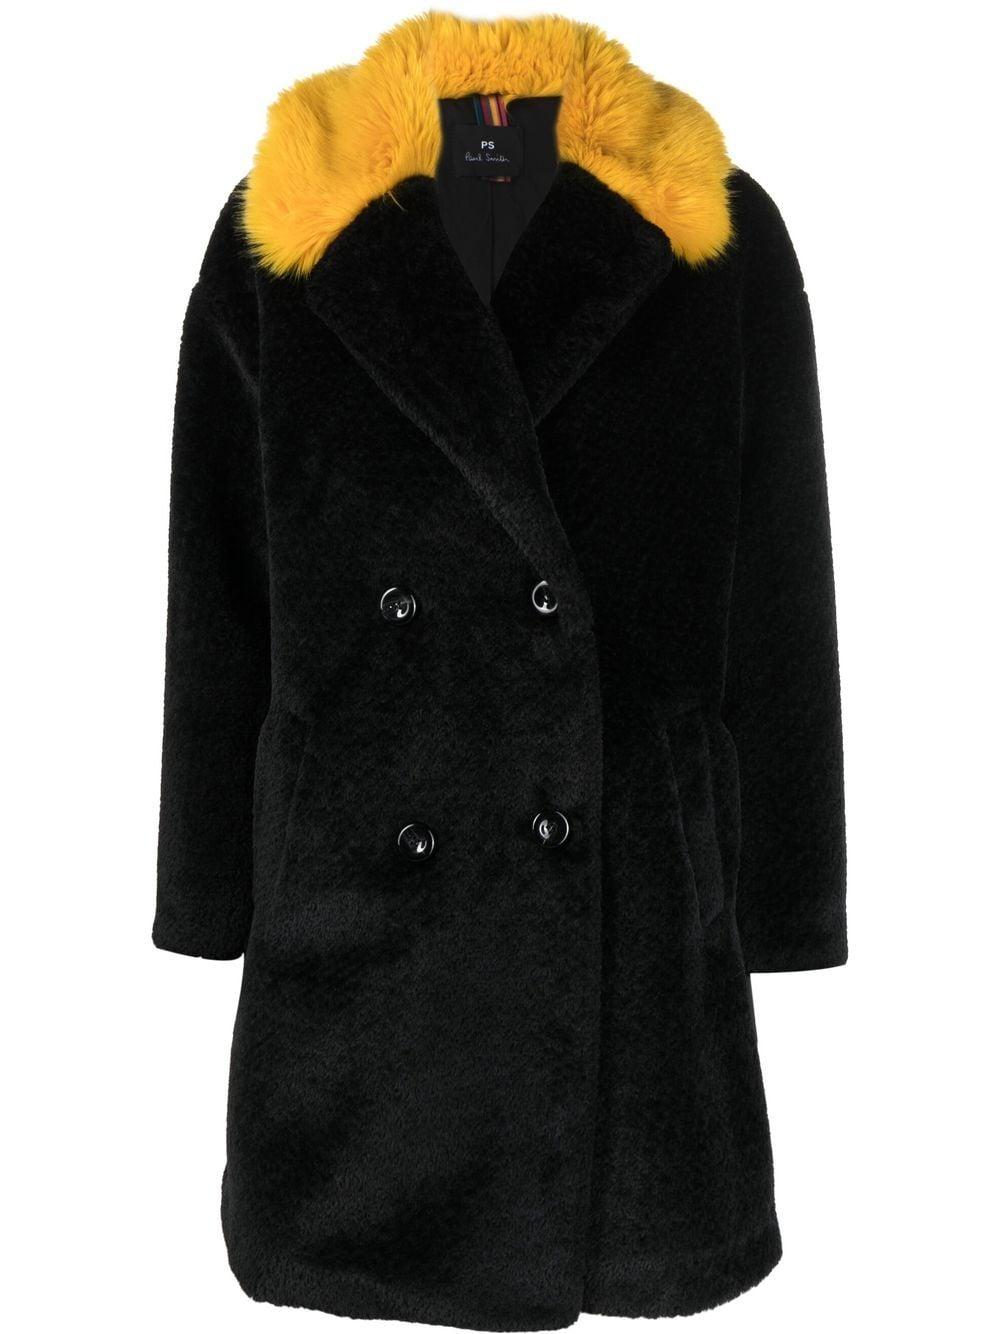 PS by Paul Smith Double-breasted Faux-fur Coat in Black | Lyst